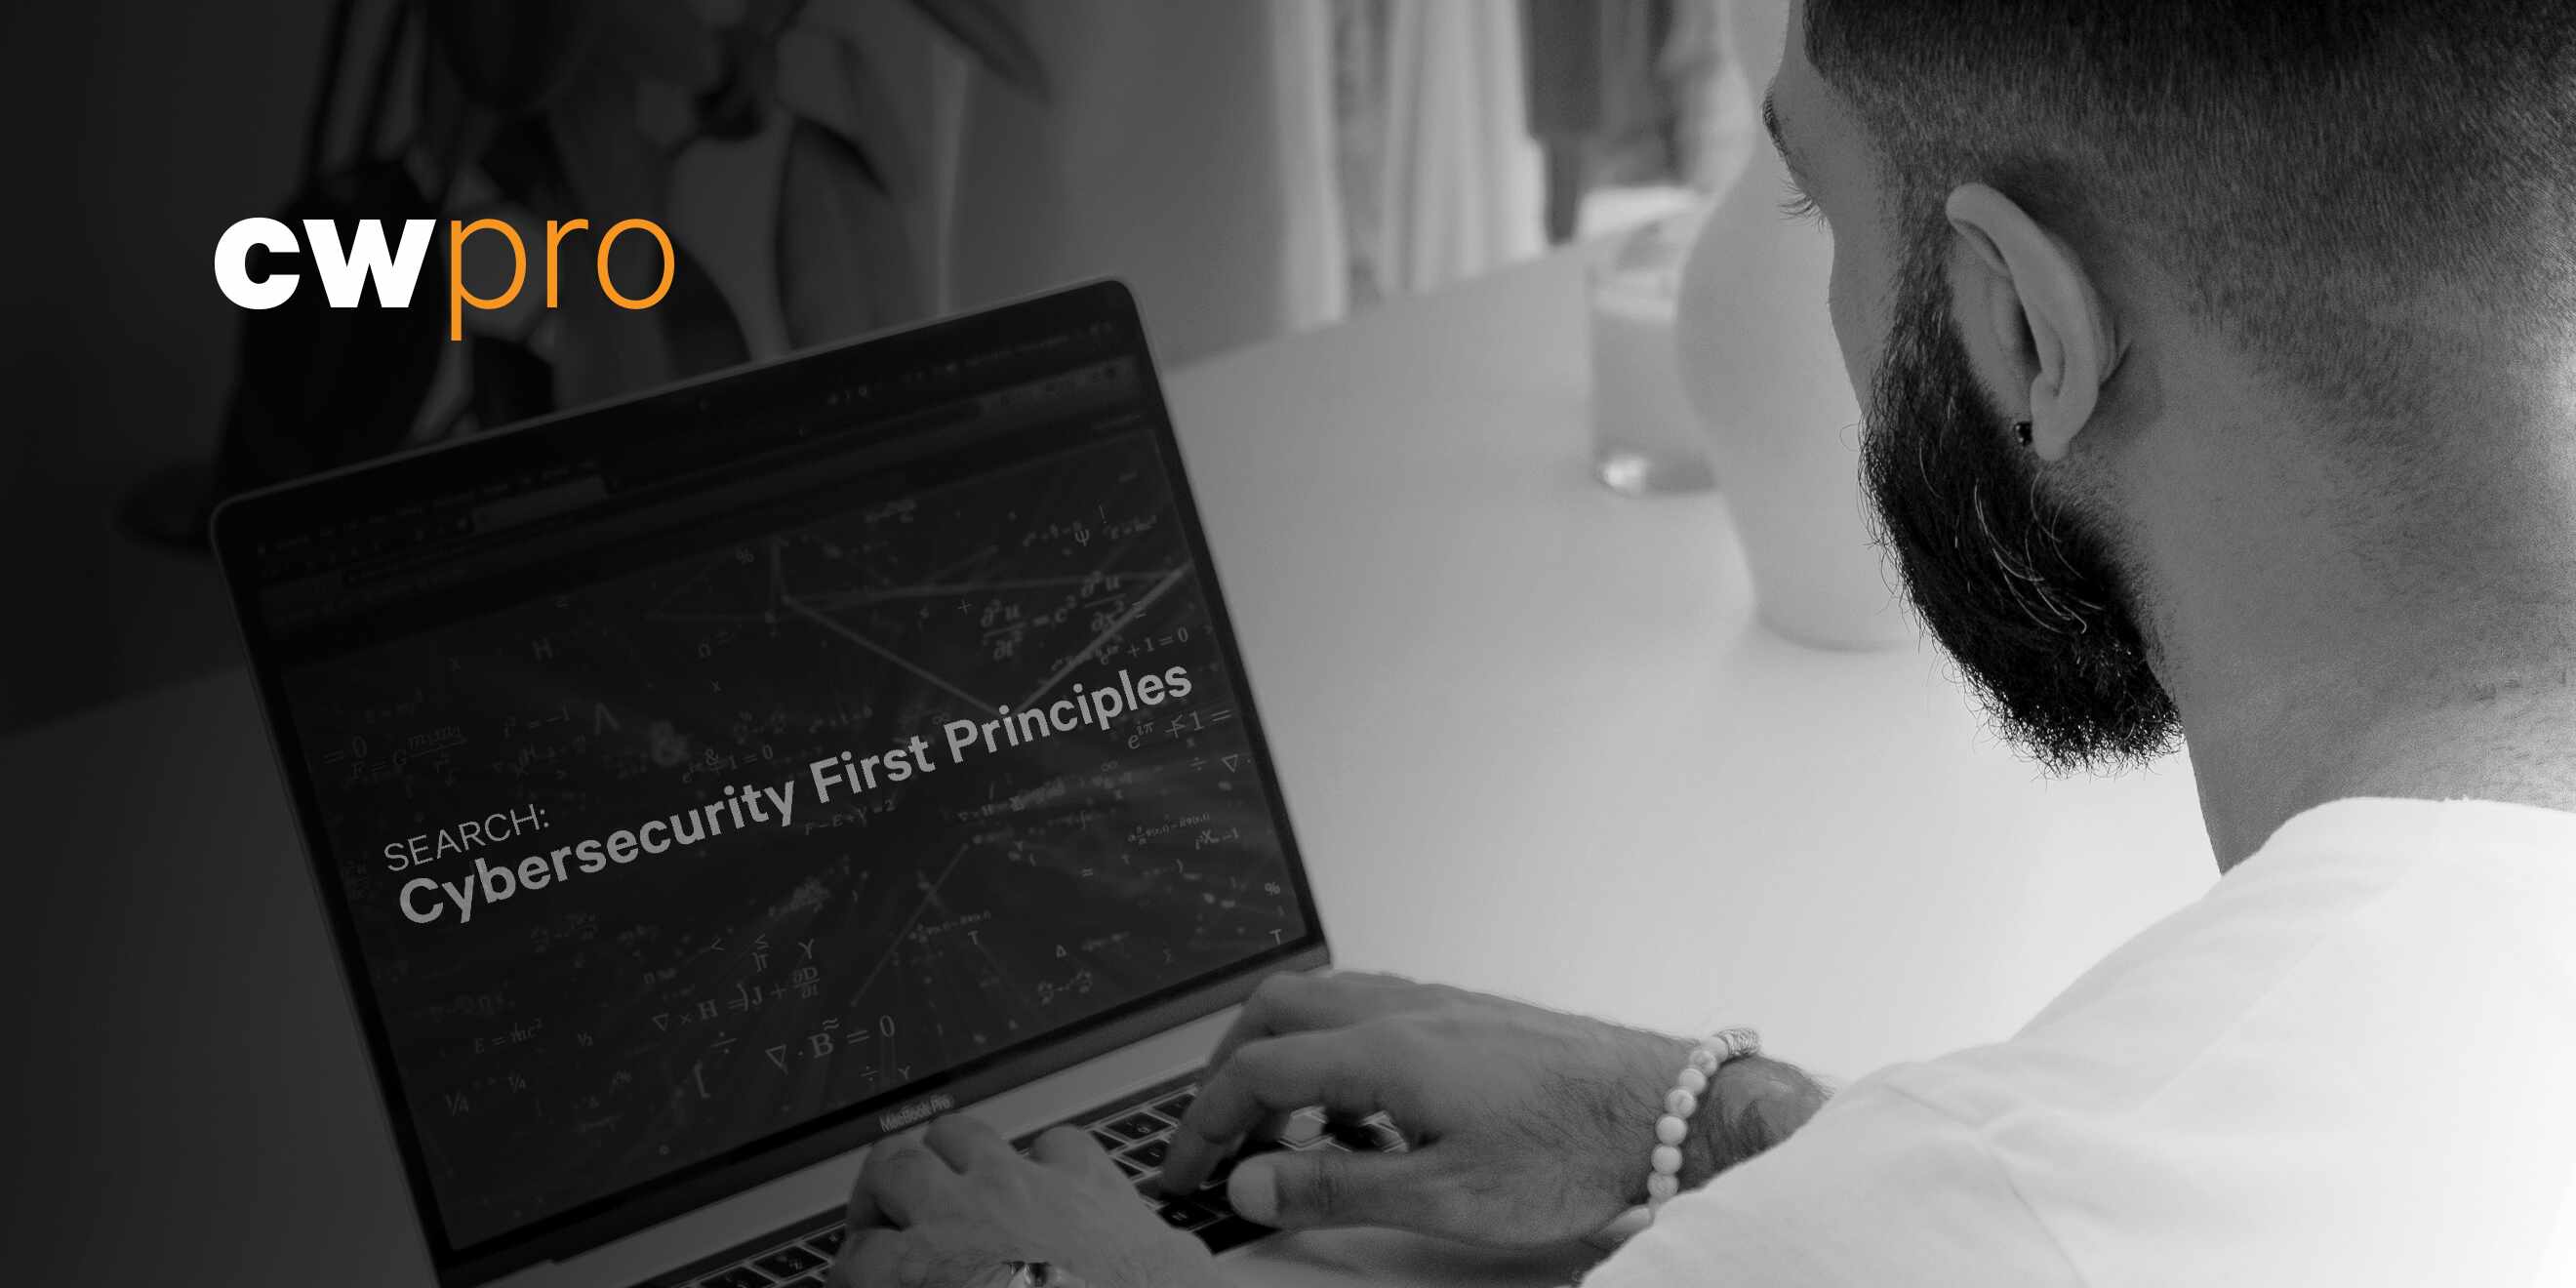 Prior research on cybersecurity first principles.